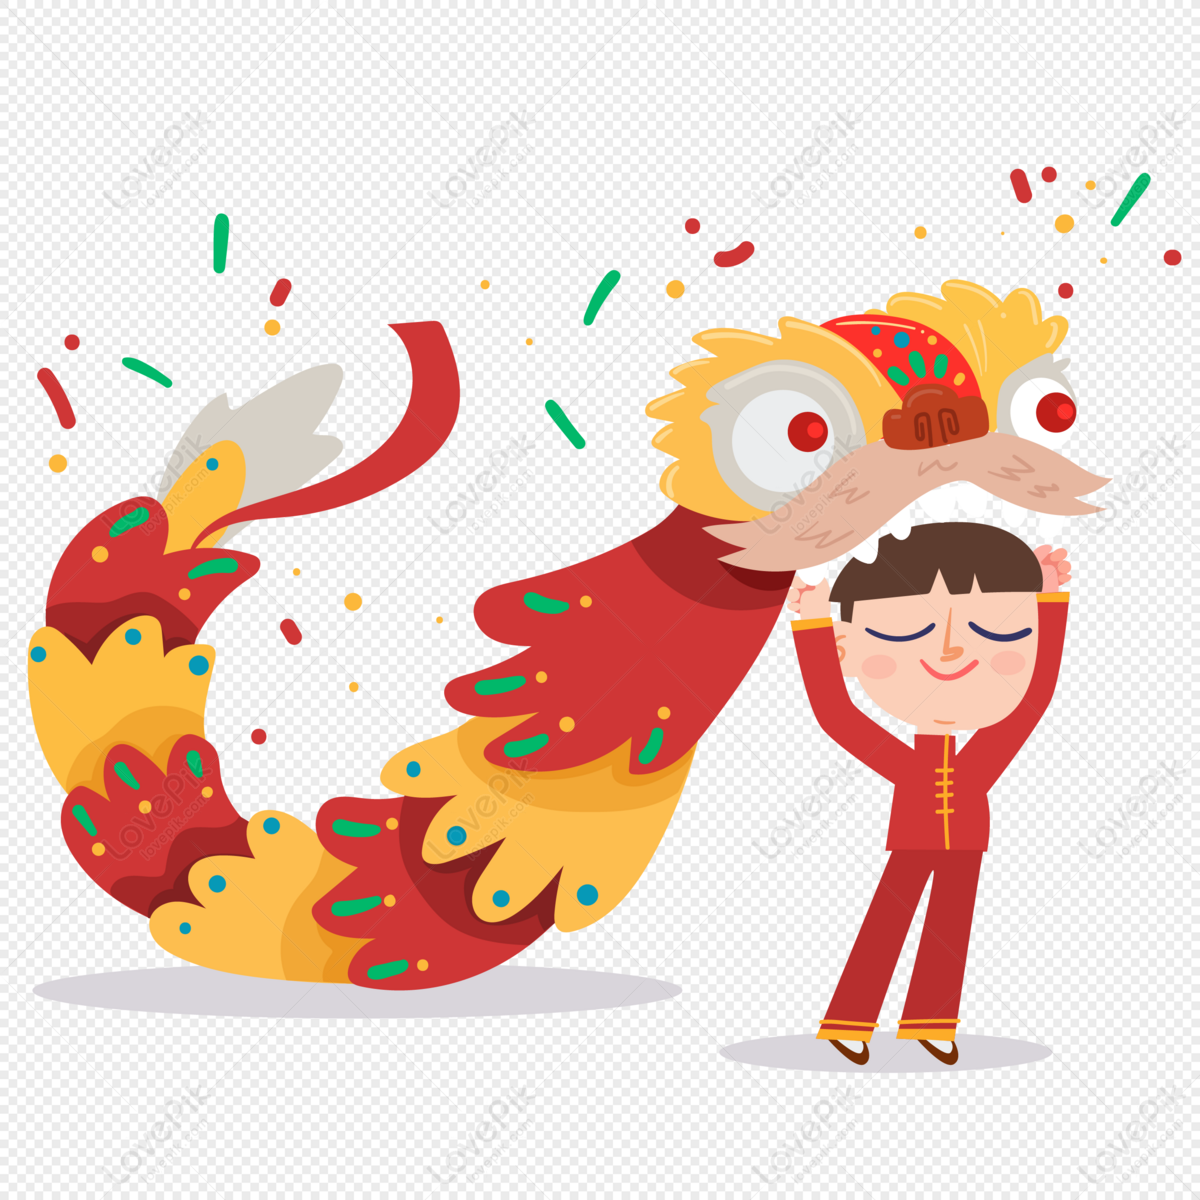 Celebrate The Chinese New Year With A Lion Dance By Lovely Boys PNG  Transparent And Clipart Image For Free Download - Lovepik | 400948906